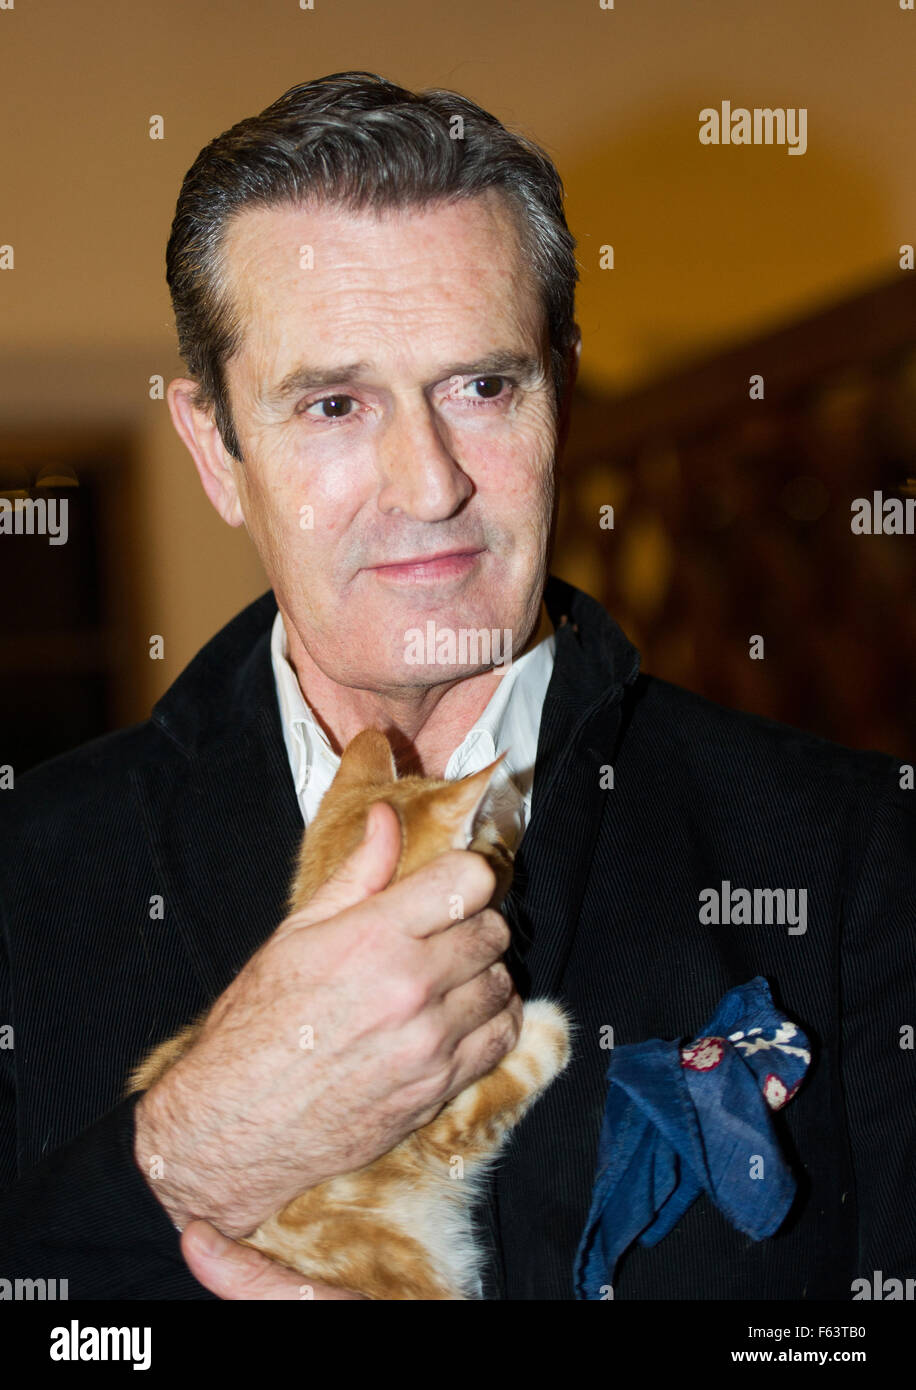 Henndorf, Austria. 10th Nov, 2015. British actor Rupert Everett poses with a dog at the opening of the traditional Christmas events in Gut Aiderbichl animal sancturay in Henndorf, Austria 10 November 2015. On 5 December 2015 at 8:15pm a program 'Advent auf Aiderbichl' will be televised on broadcaster ORF 2 and 'tierisch, tierisch' (lt: beastly, beastly) will air pn the 23 and 30 Decemeber 2015 at 7:50pm, reporting from the Christmas events. At the sanctuary animals are taken in who have had a sad history. © dpa picture alliance/Alamy Live News Stock Photo